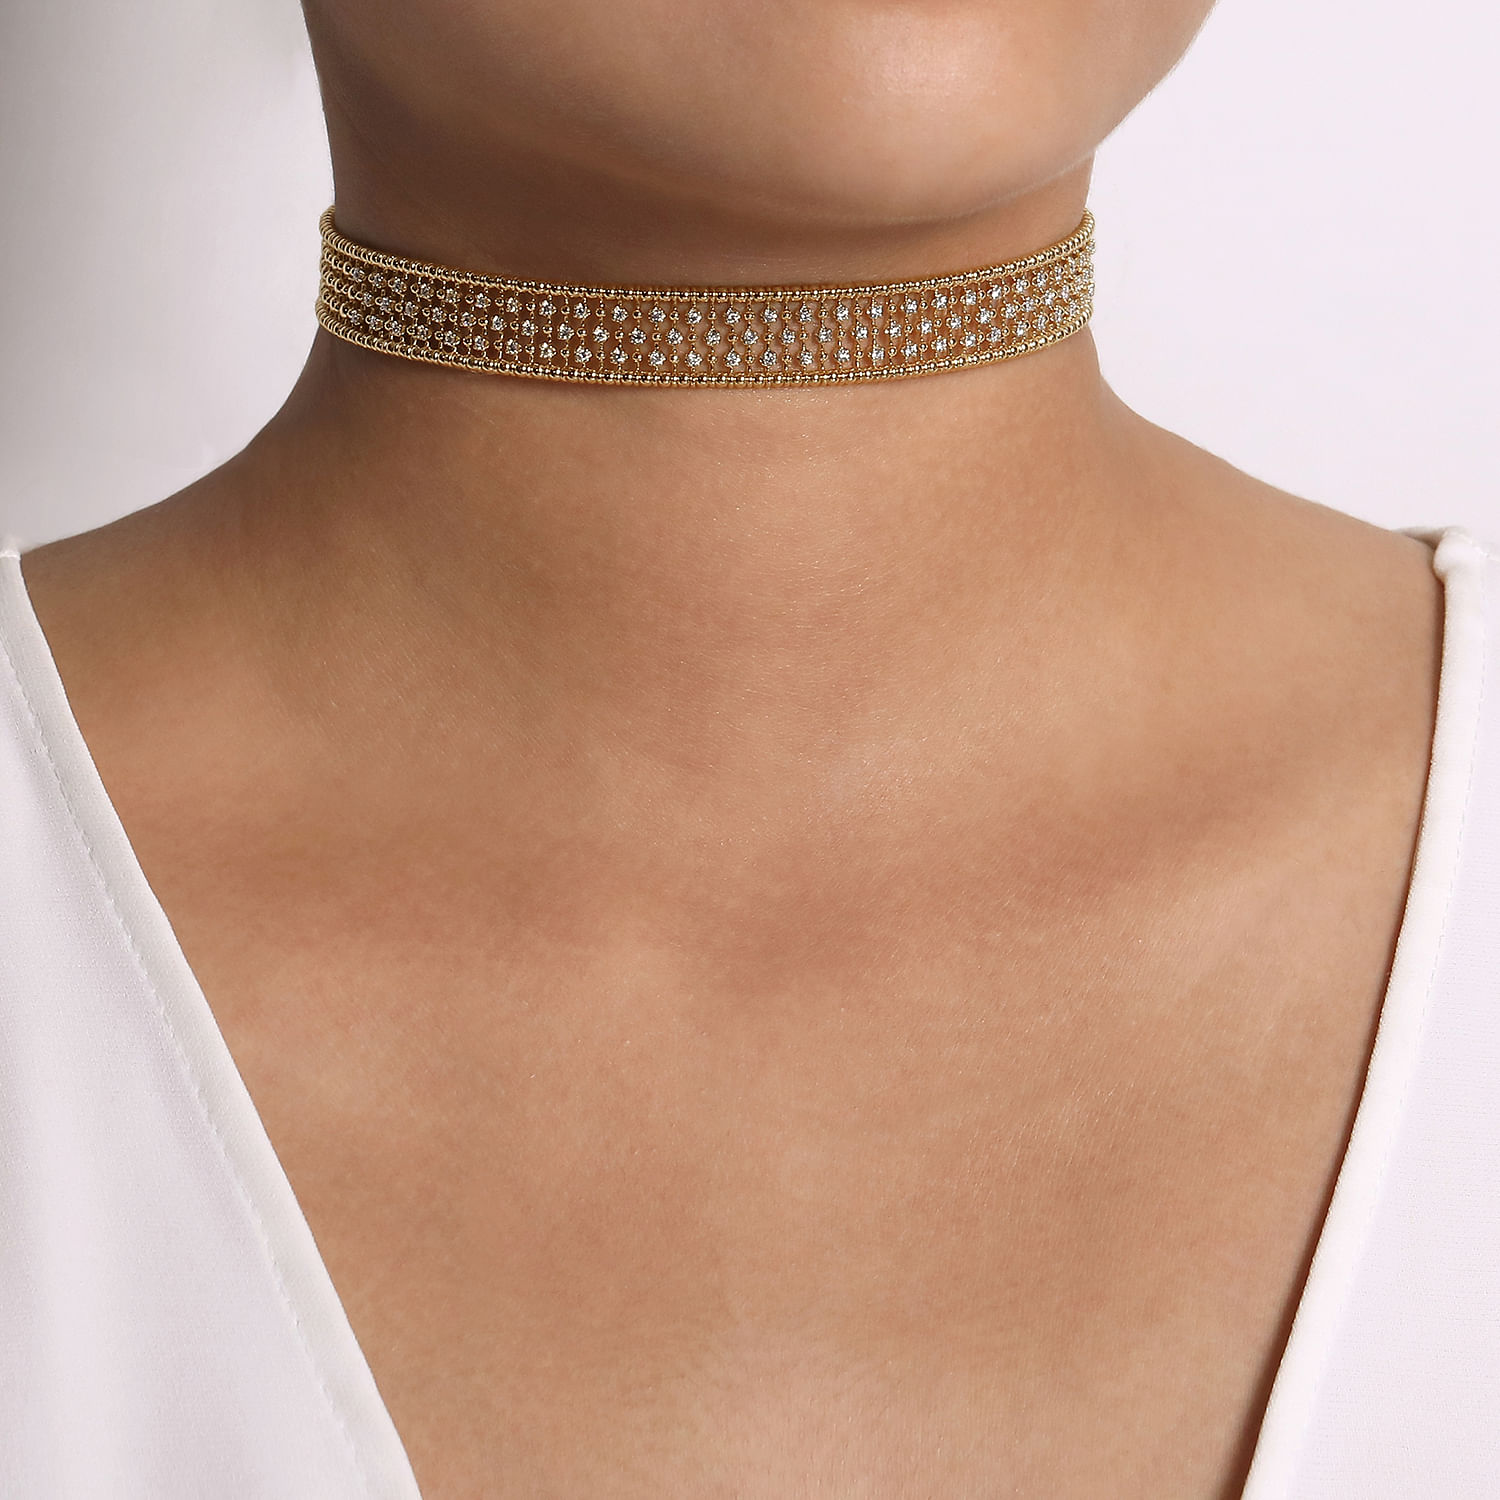 14K Yellow Gold Wide Diamond Station Choker Necklace with Bujukan Beads, 11.5+4 inch